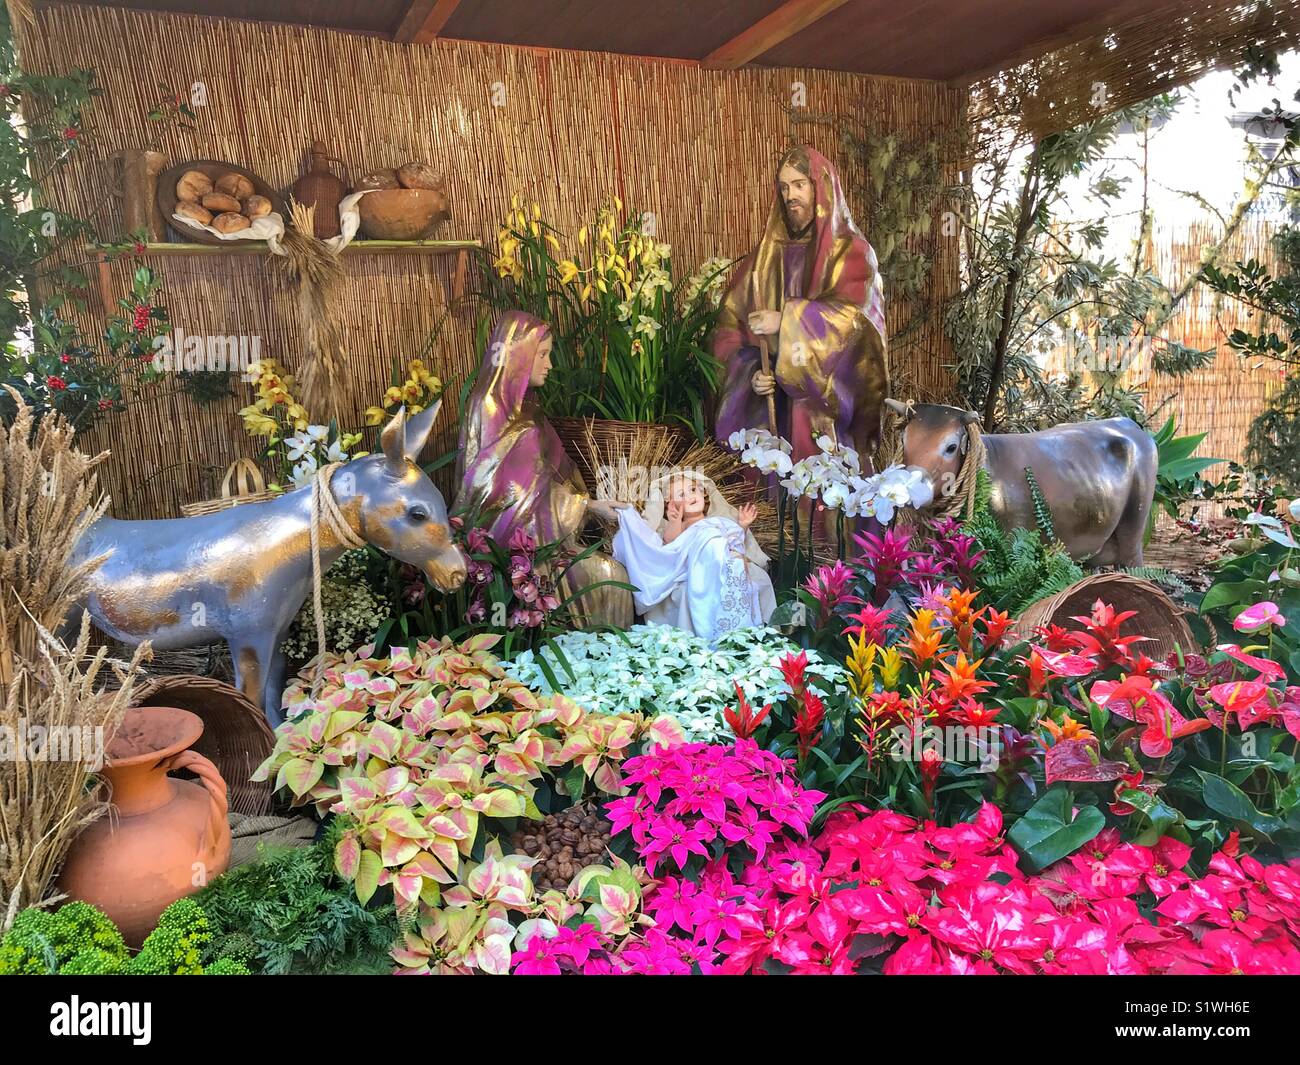 Celebrating Christmas. Nativity scene, known as a presepio, in Av. Arriaga, Funchal, Portugal. Fresh, colourful, flowers are used in the display. Stock Photo